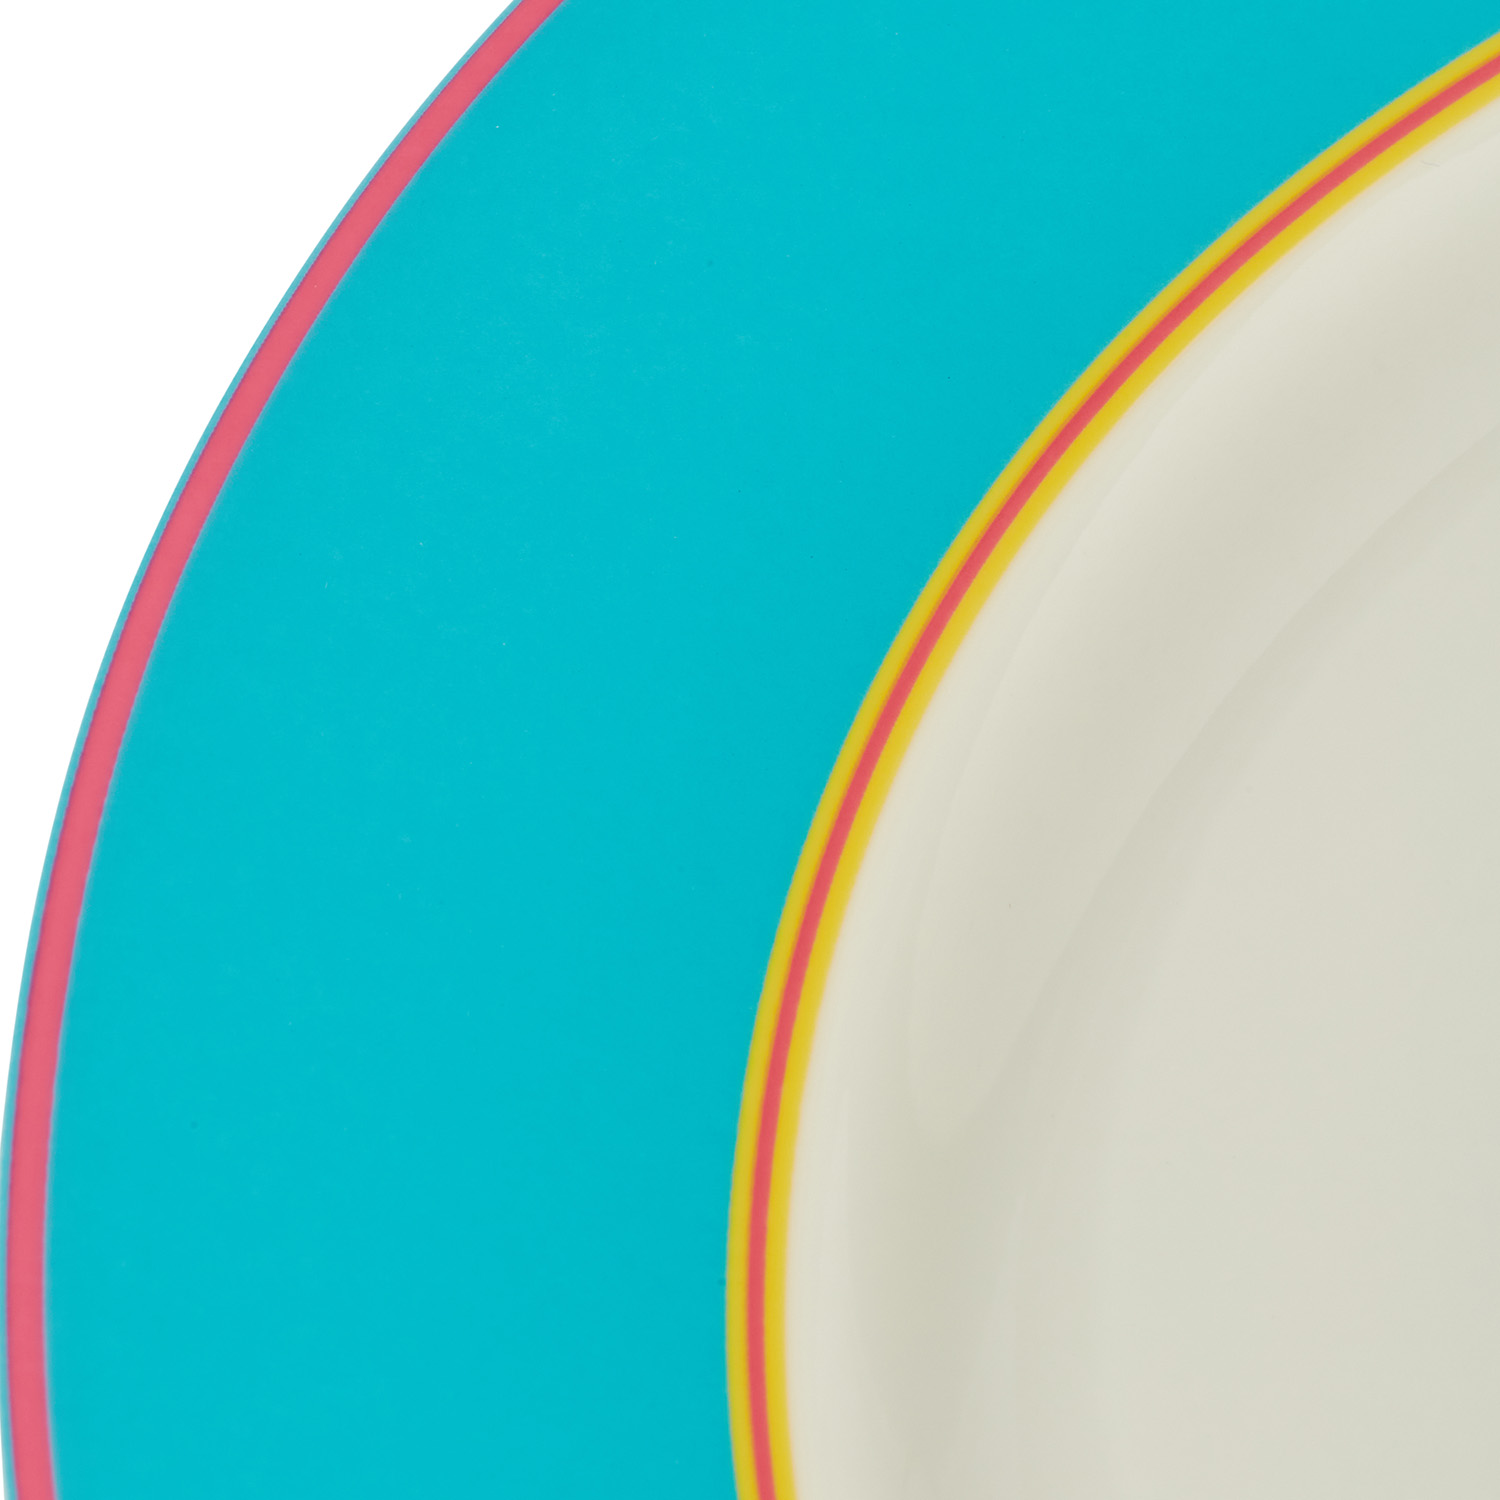 Calypso Turquiose Dinner Plate image number null